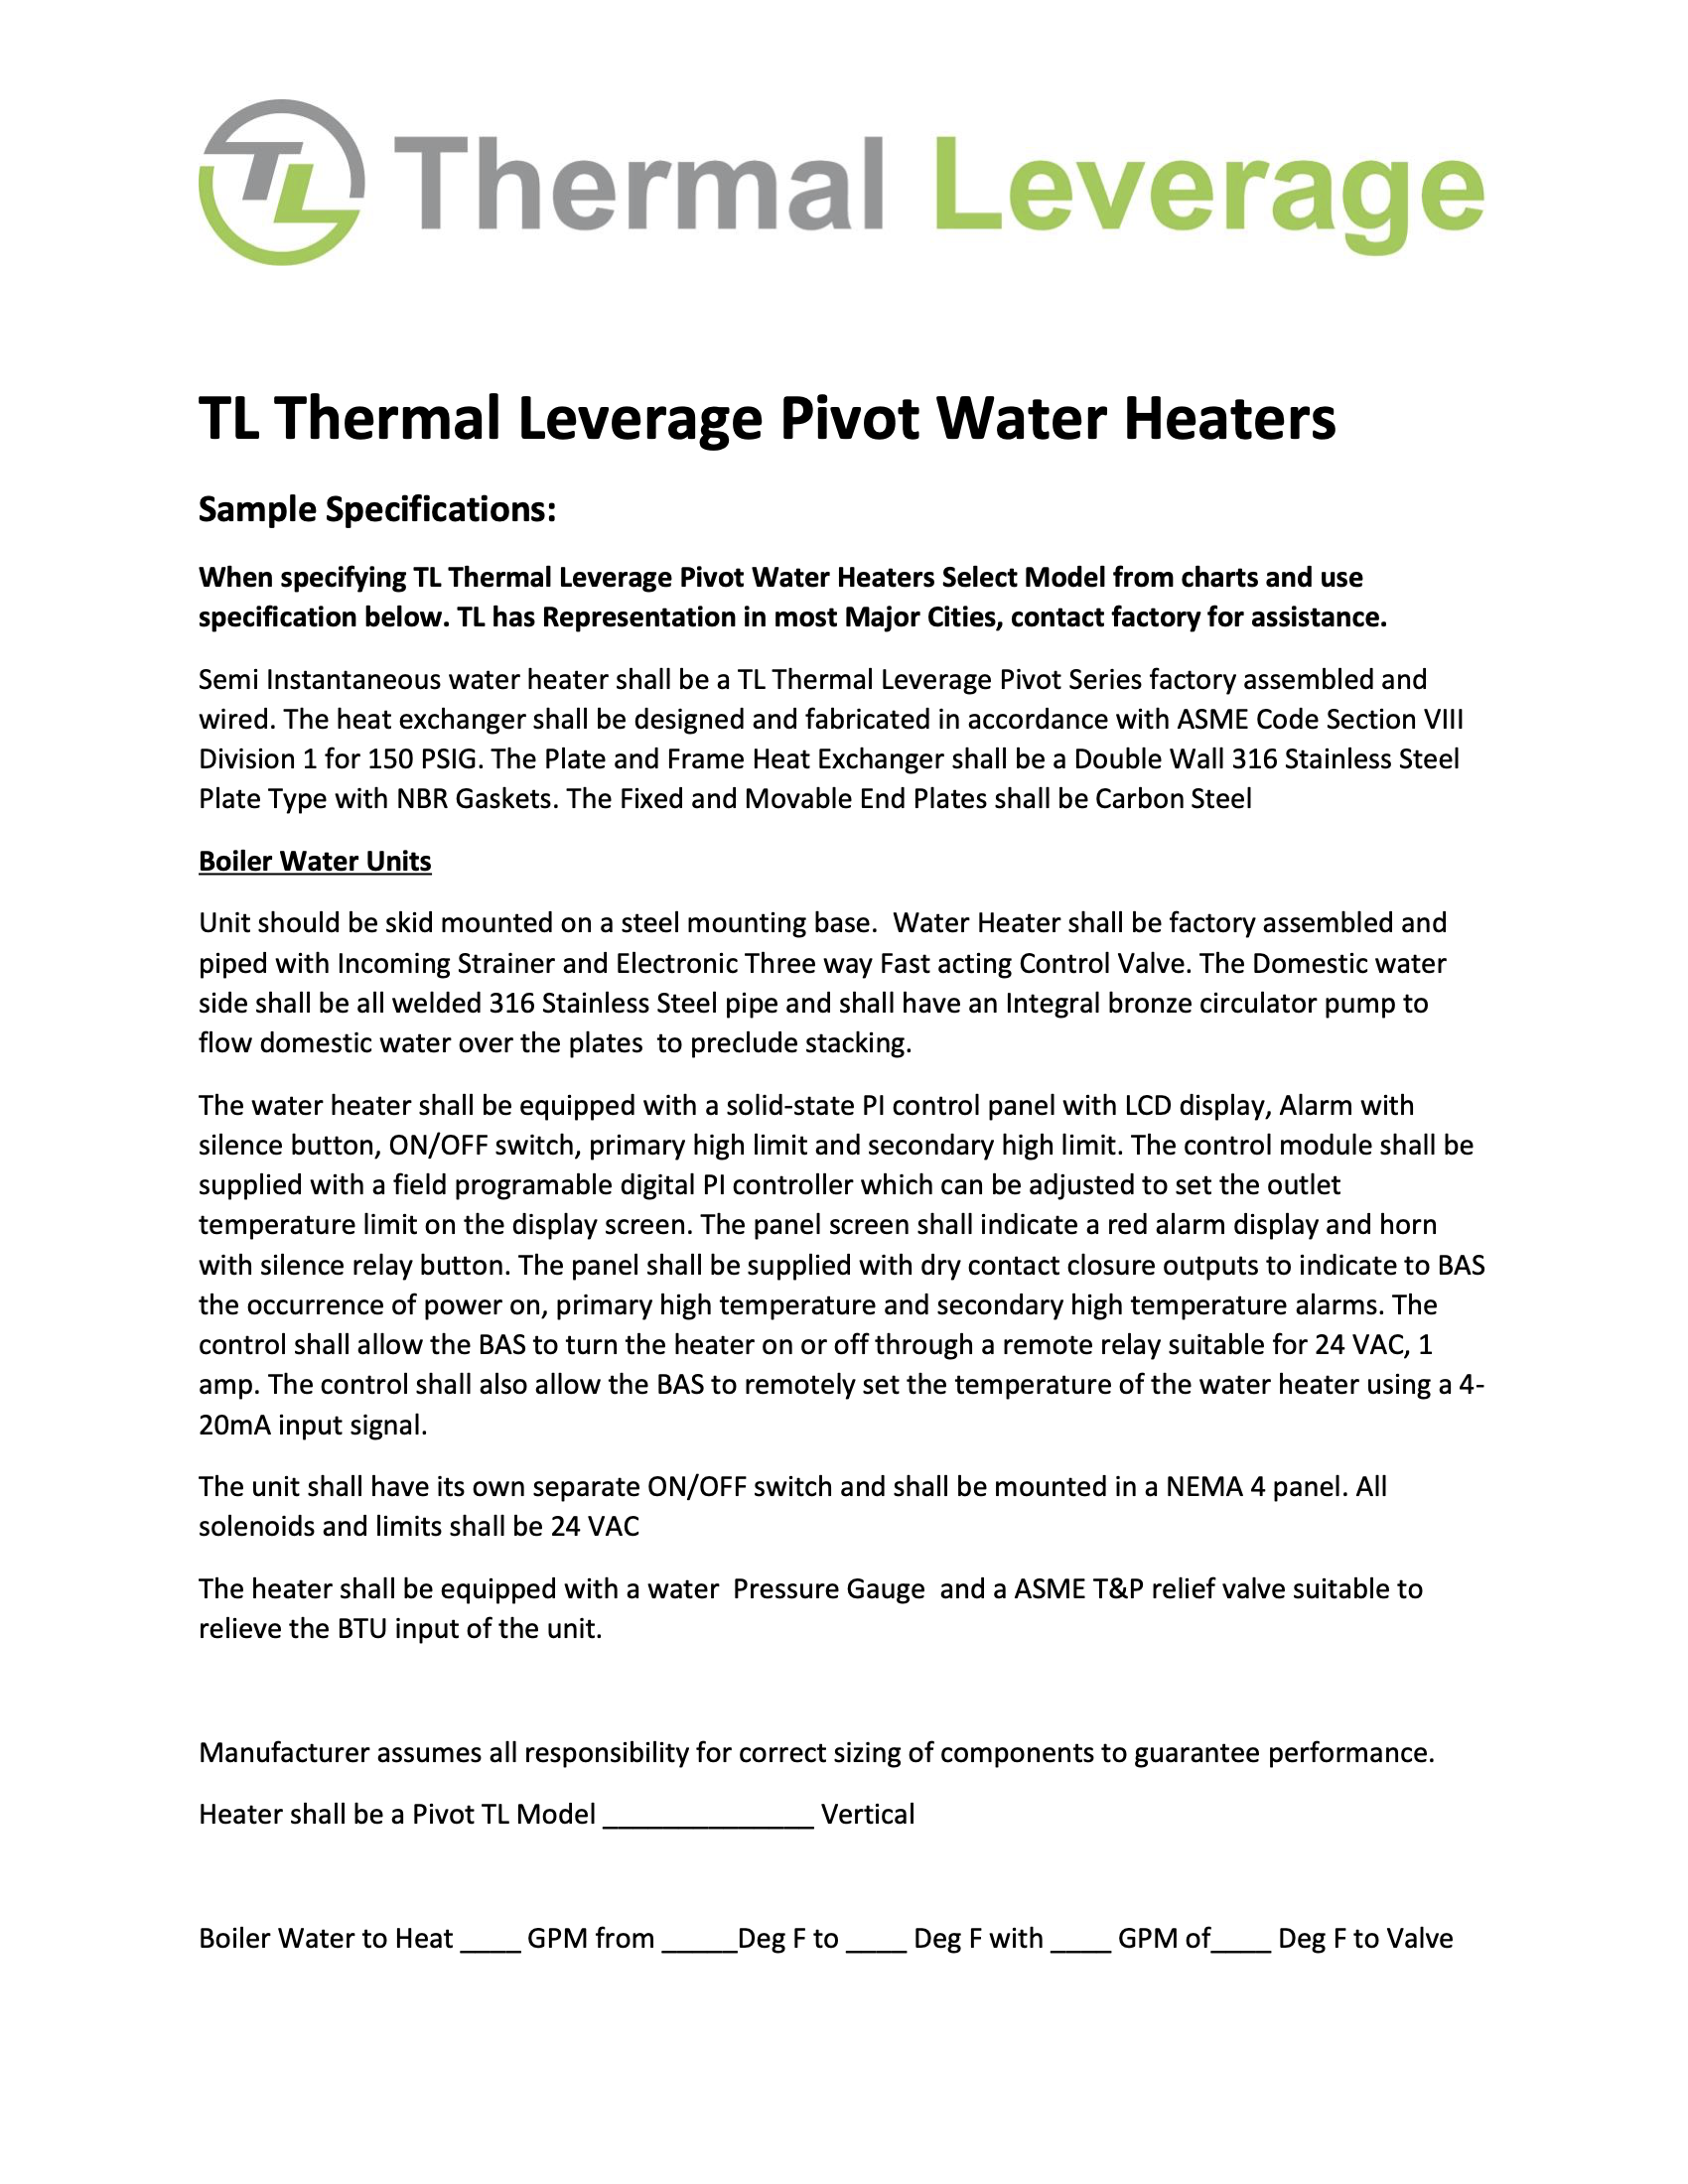 TL-Pivot-Water-Heaters-Specifications.png